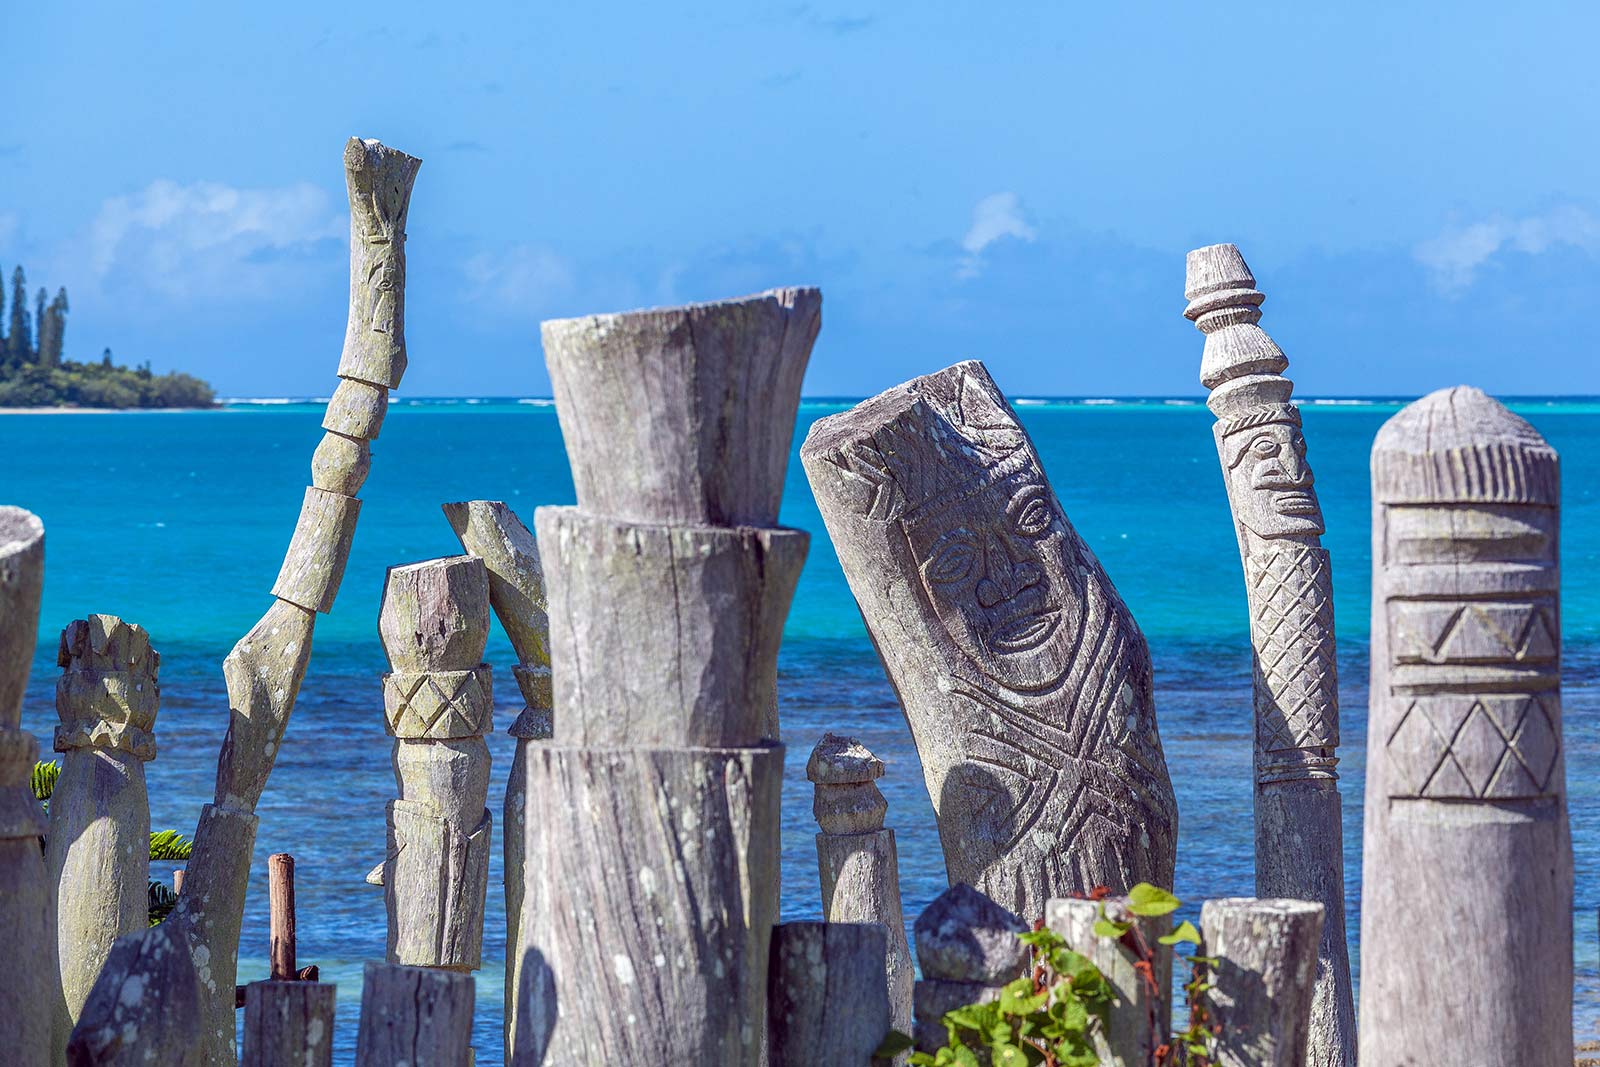 Isle of Pines totems in New Caledonia